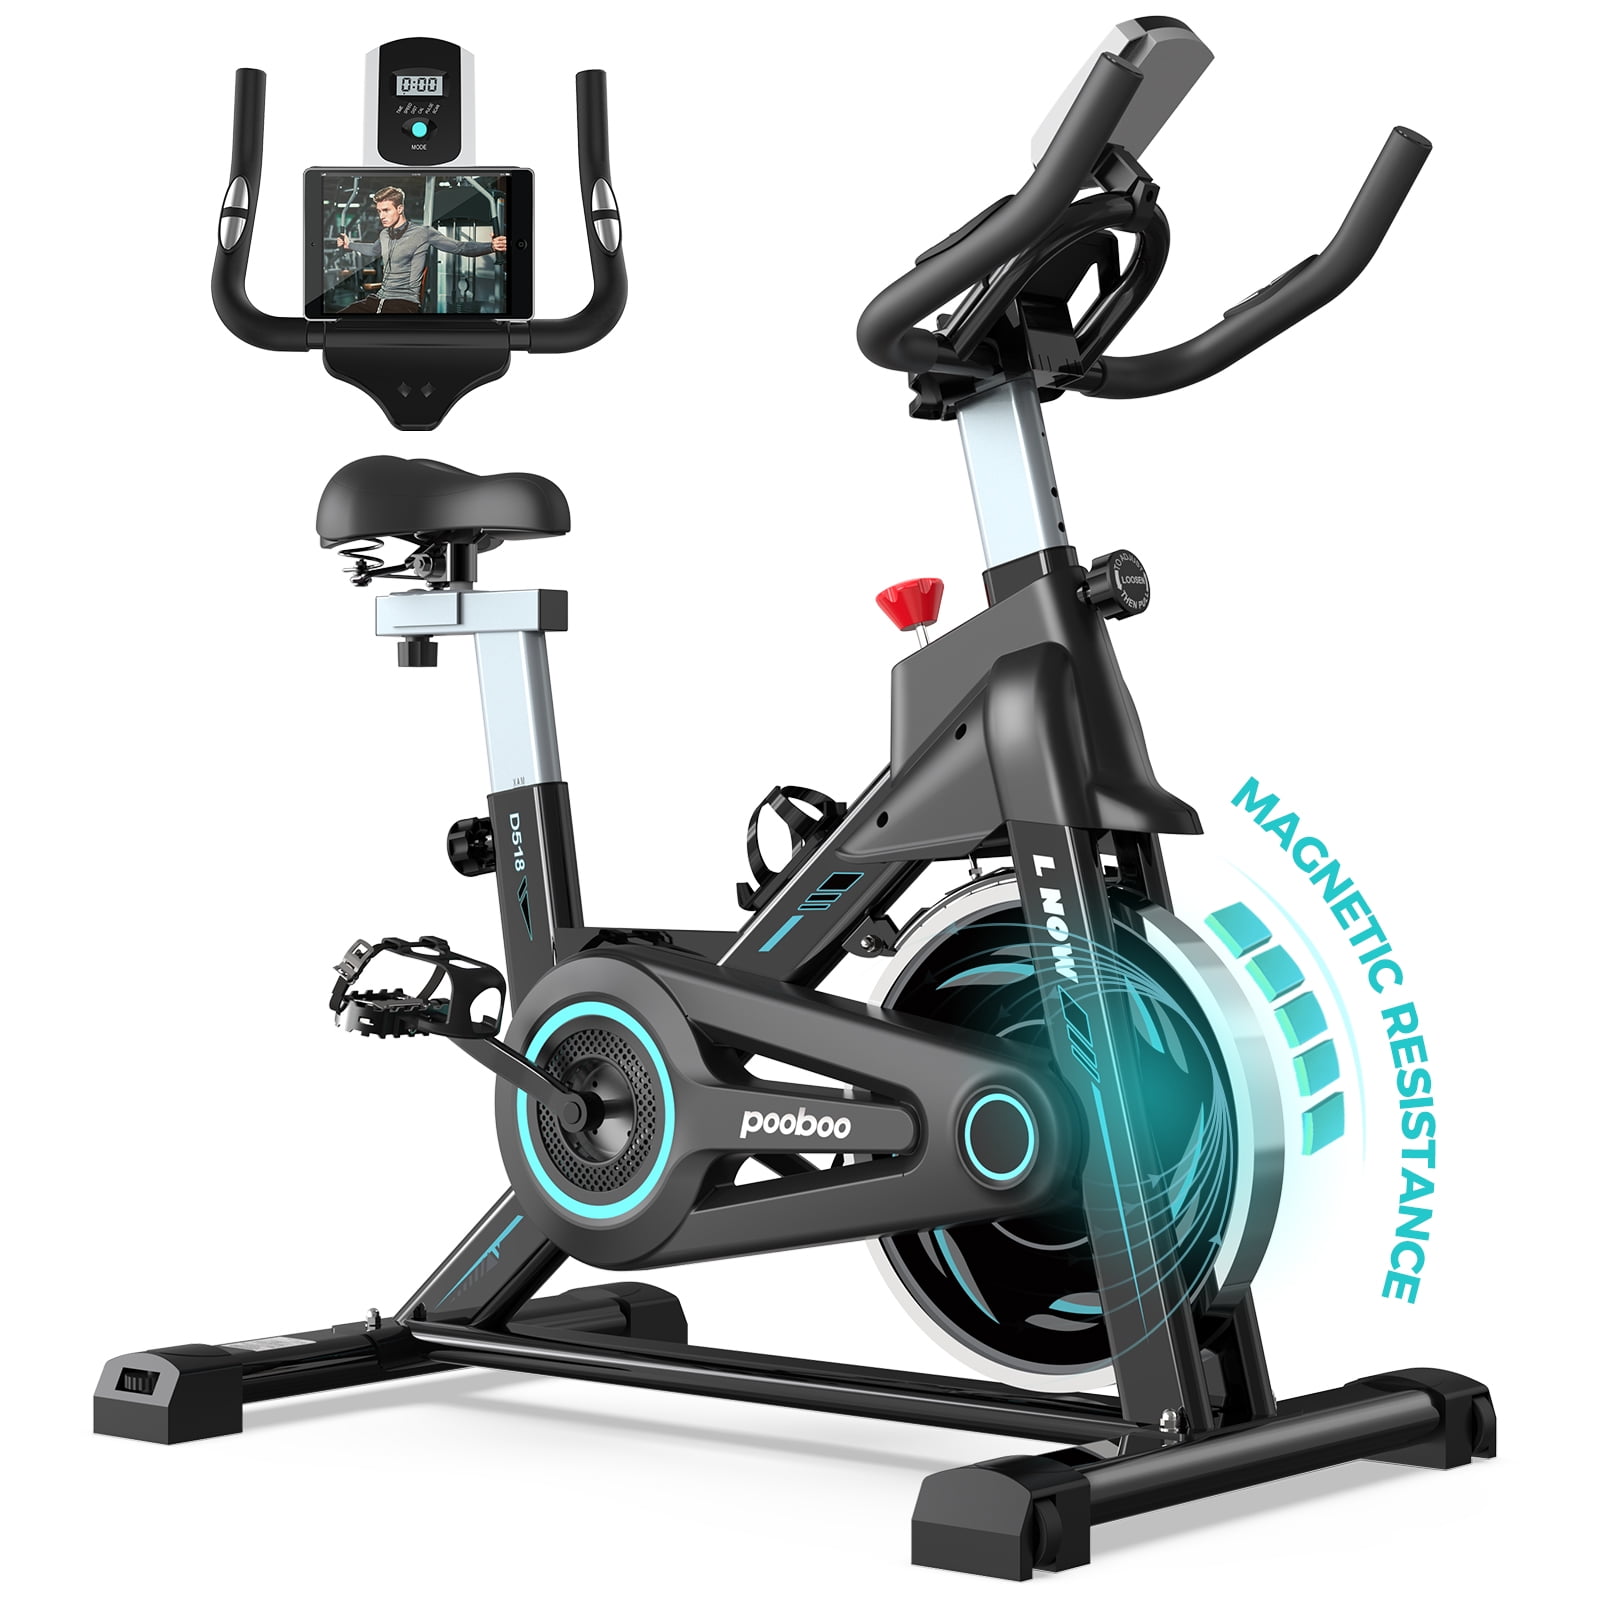 Pooboo Indoor Cycling Bike Stationary Magnetic Exercise Bikes Bicycle Machine for Home Cardio Workout 350lb